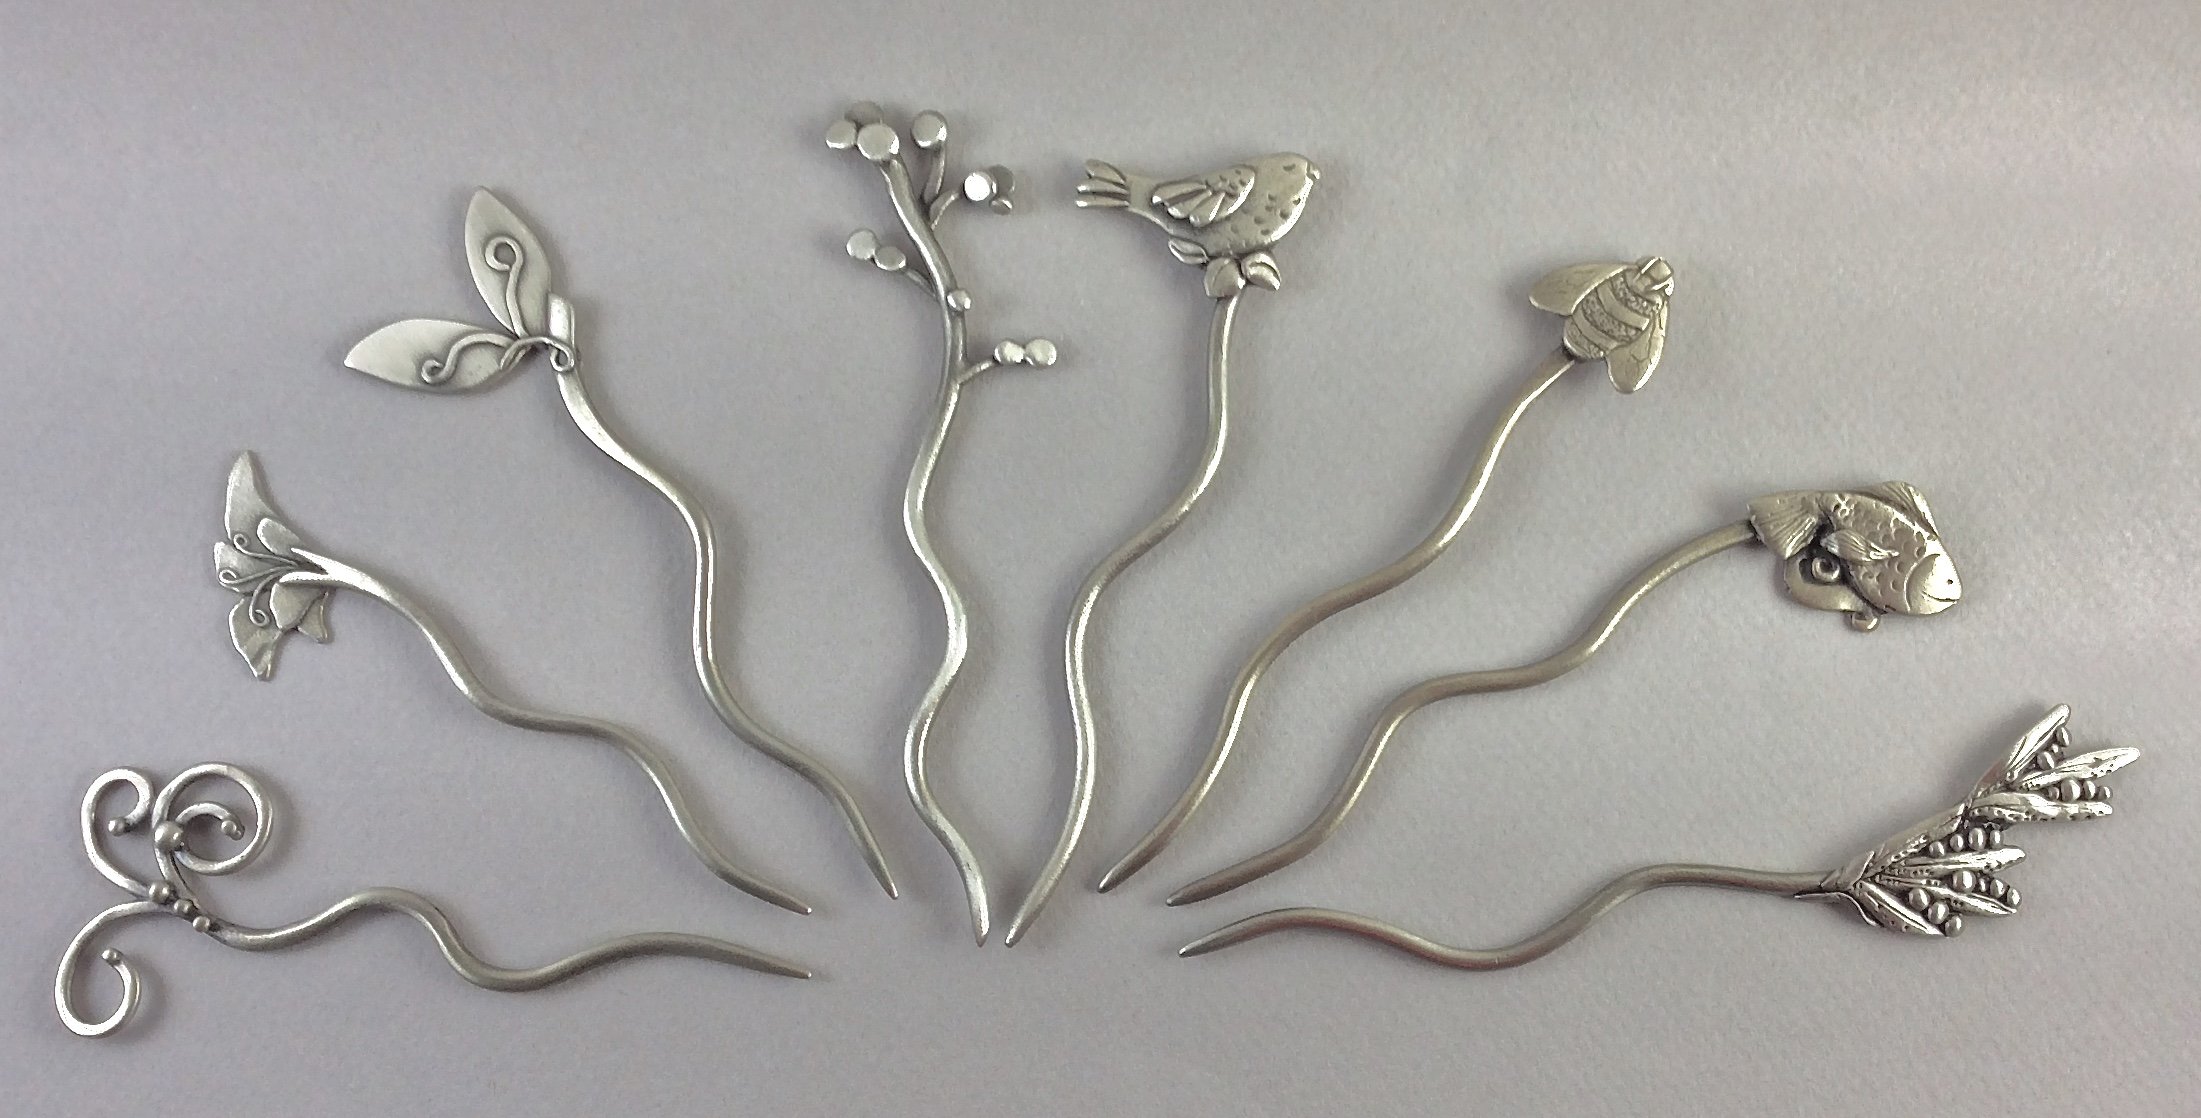 STICK PINS      curly q         flower        sprout        branch        bird       bee        fish        olive